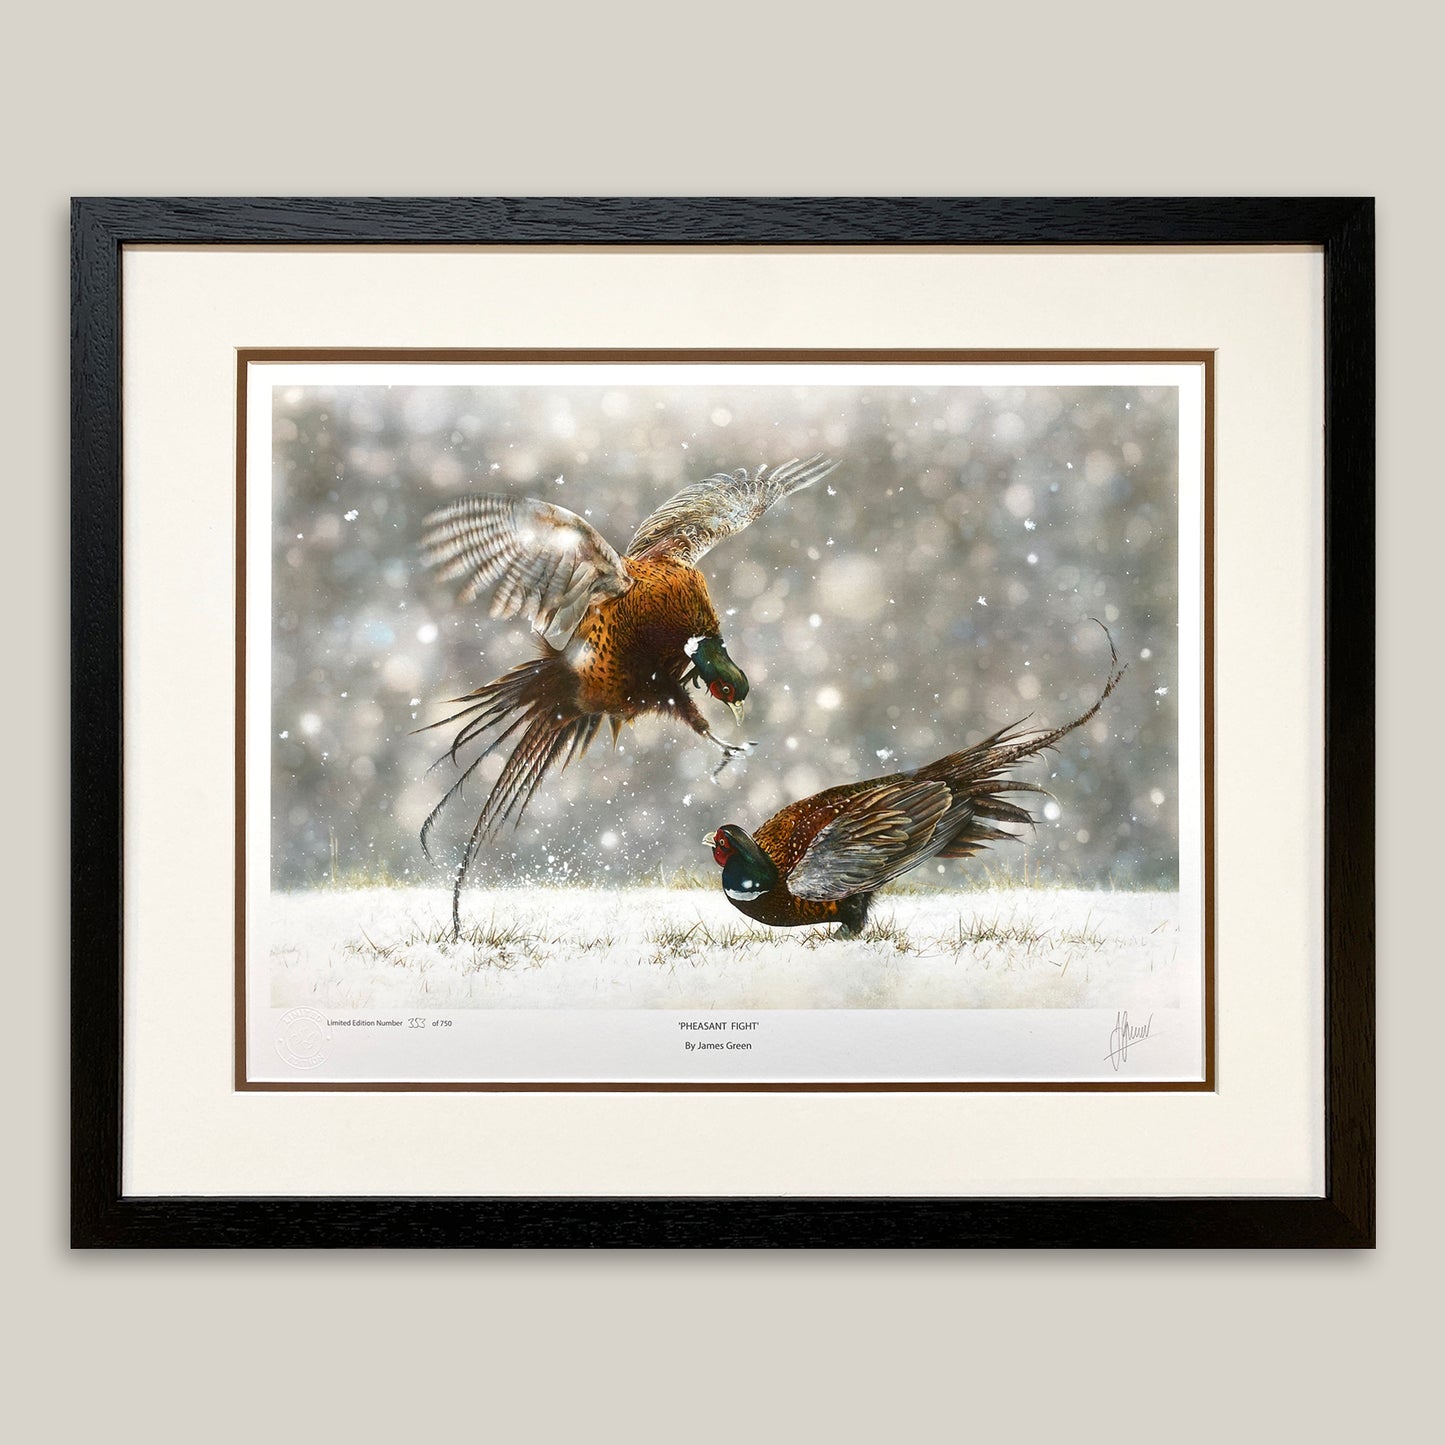 framed limited edition print of two pheasants in the snow by the artist James Green